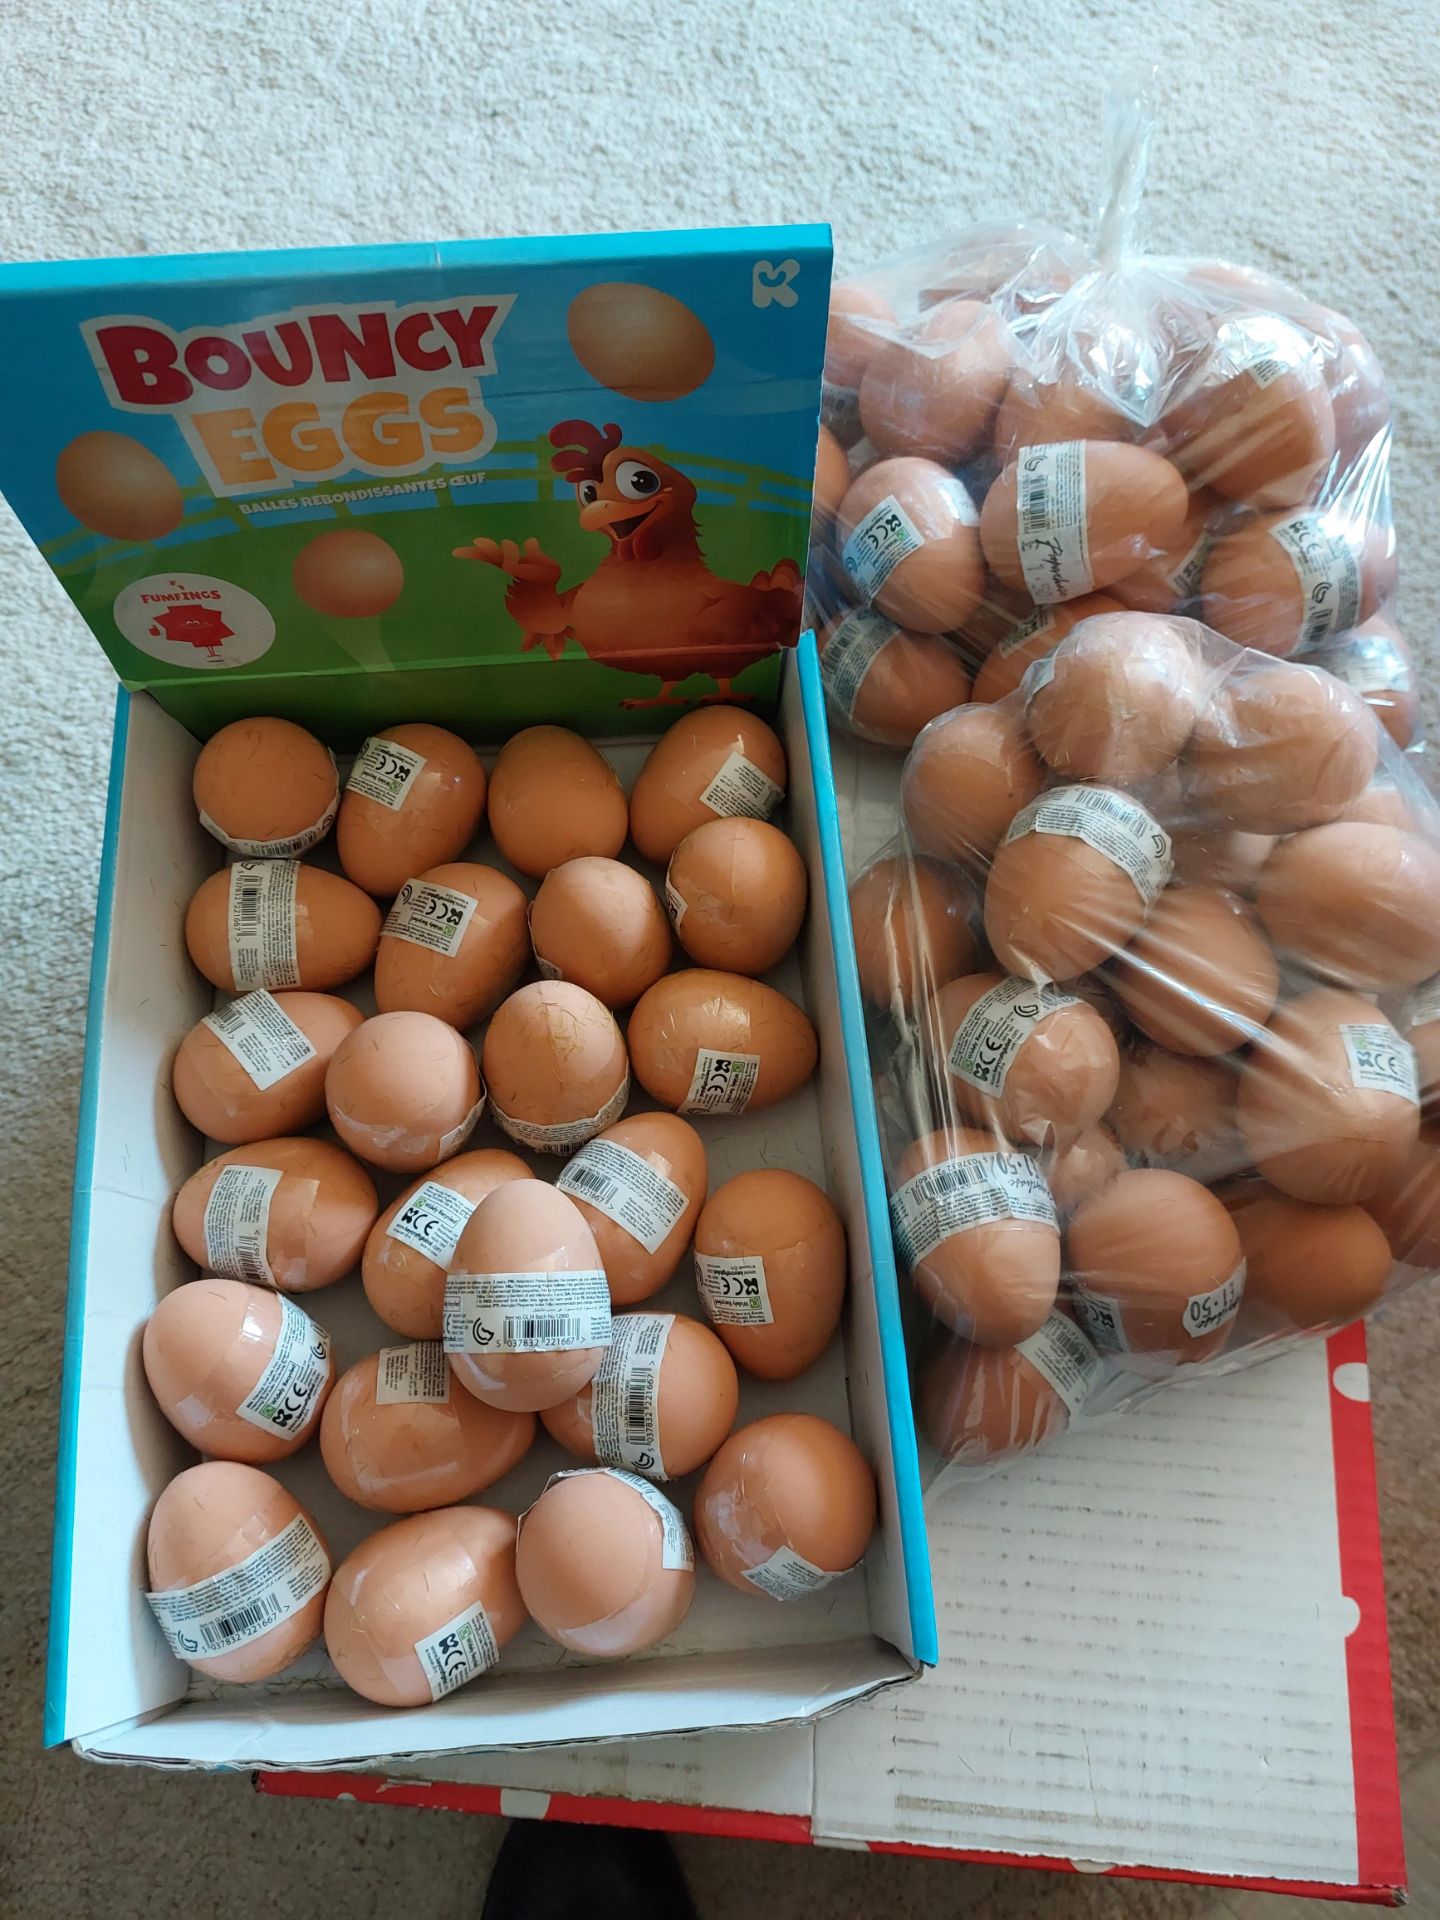 Box of 20 Bouncy Eggs. - Image 2 of 2